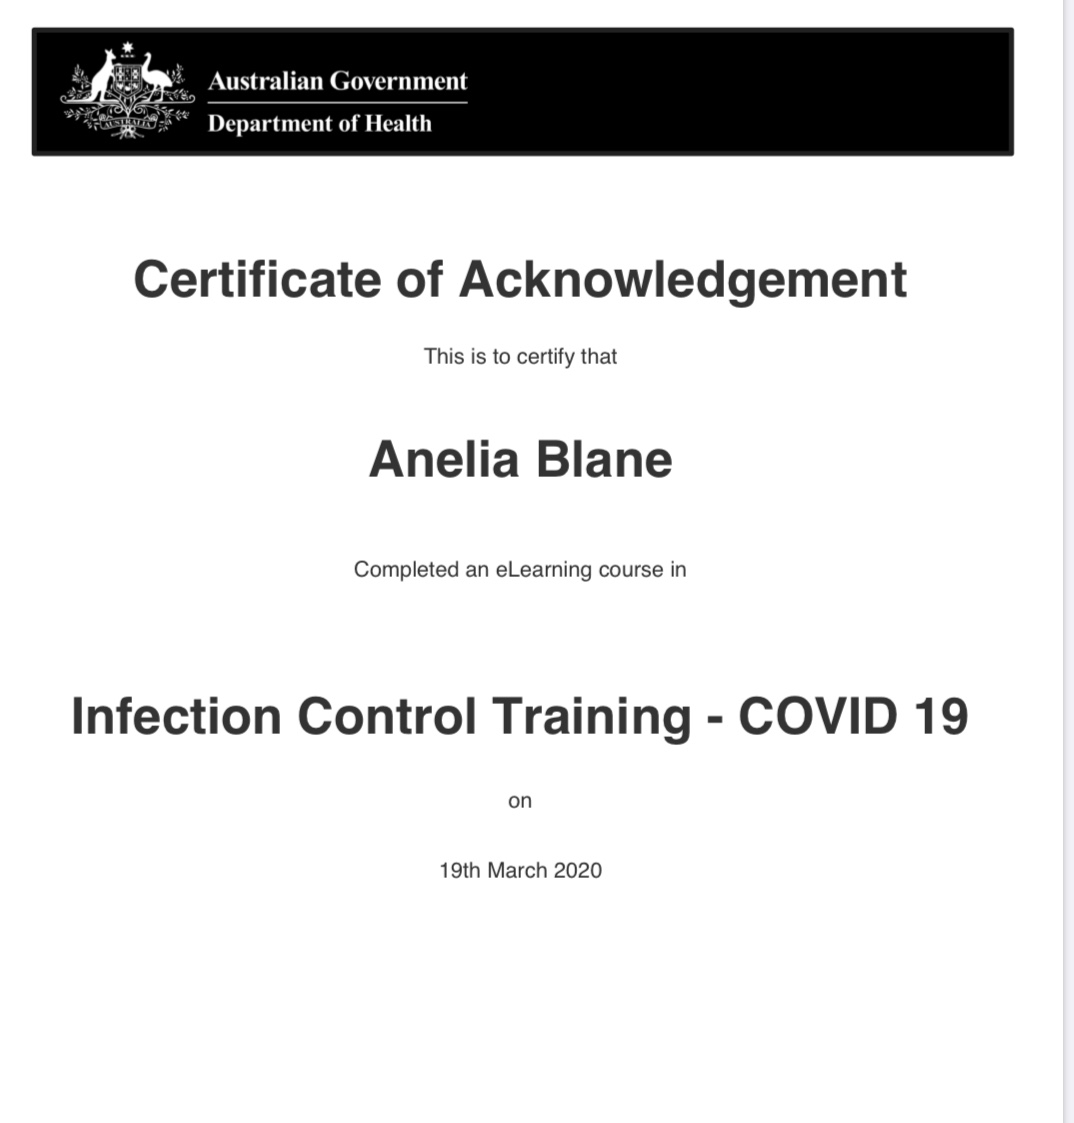 Infection Control Training Certificate - Anelia